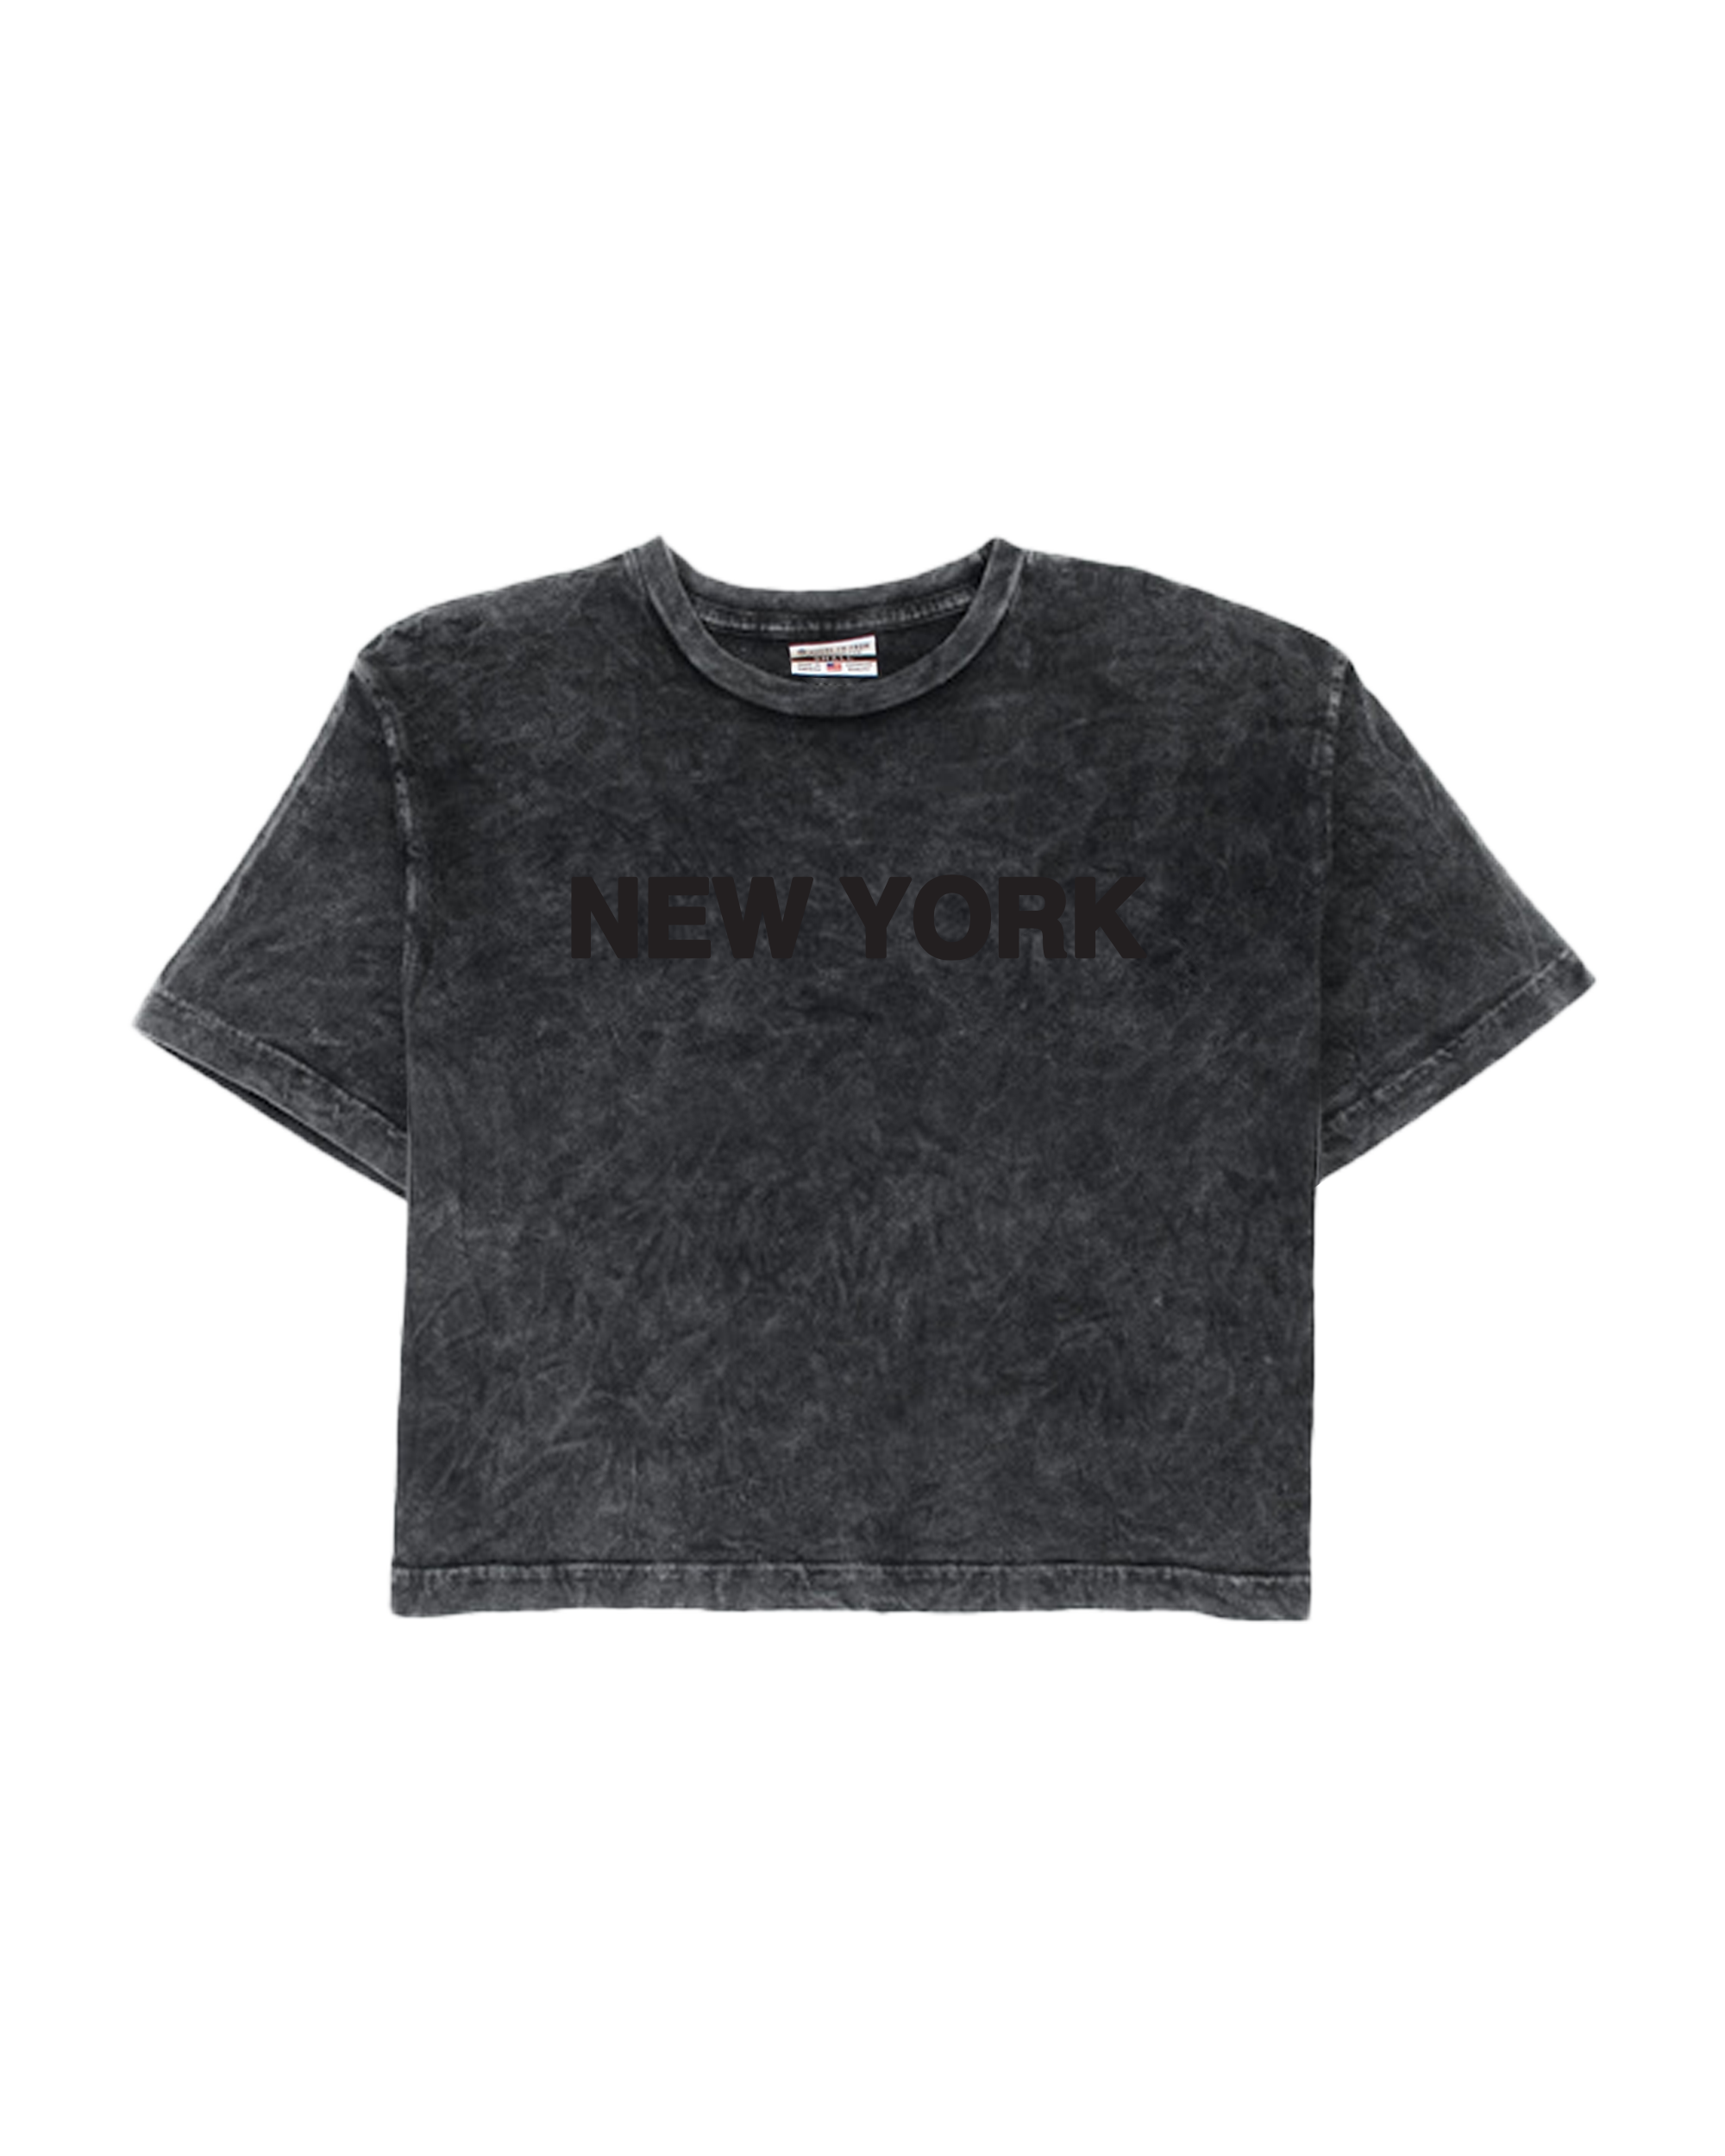 Simple NY Mineral Crop Top